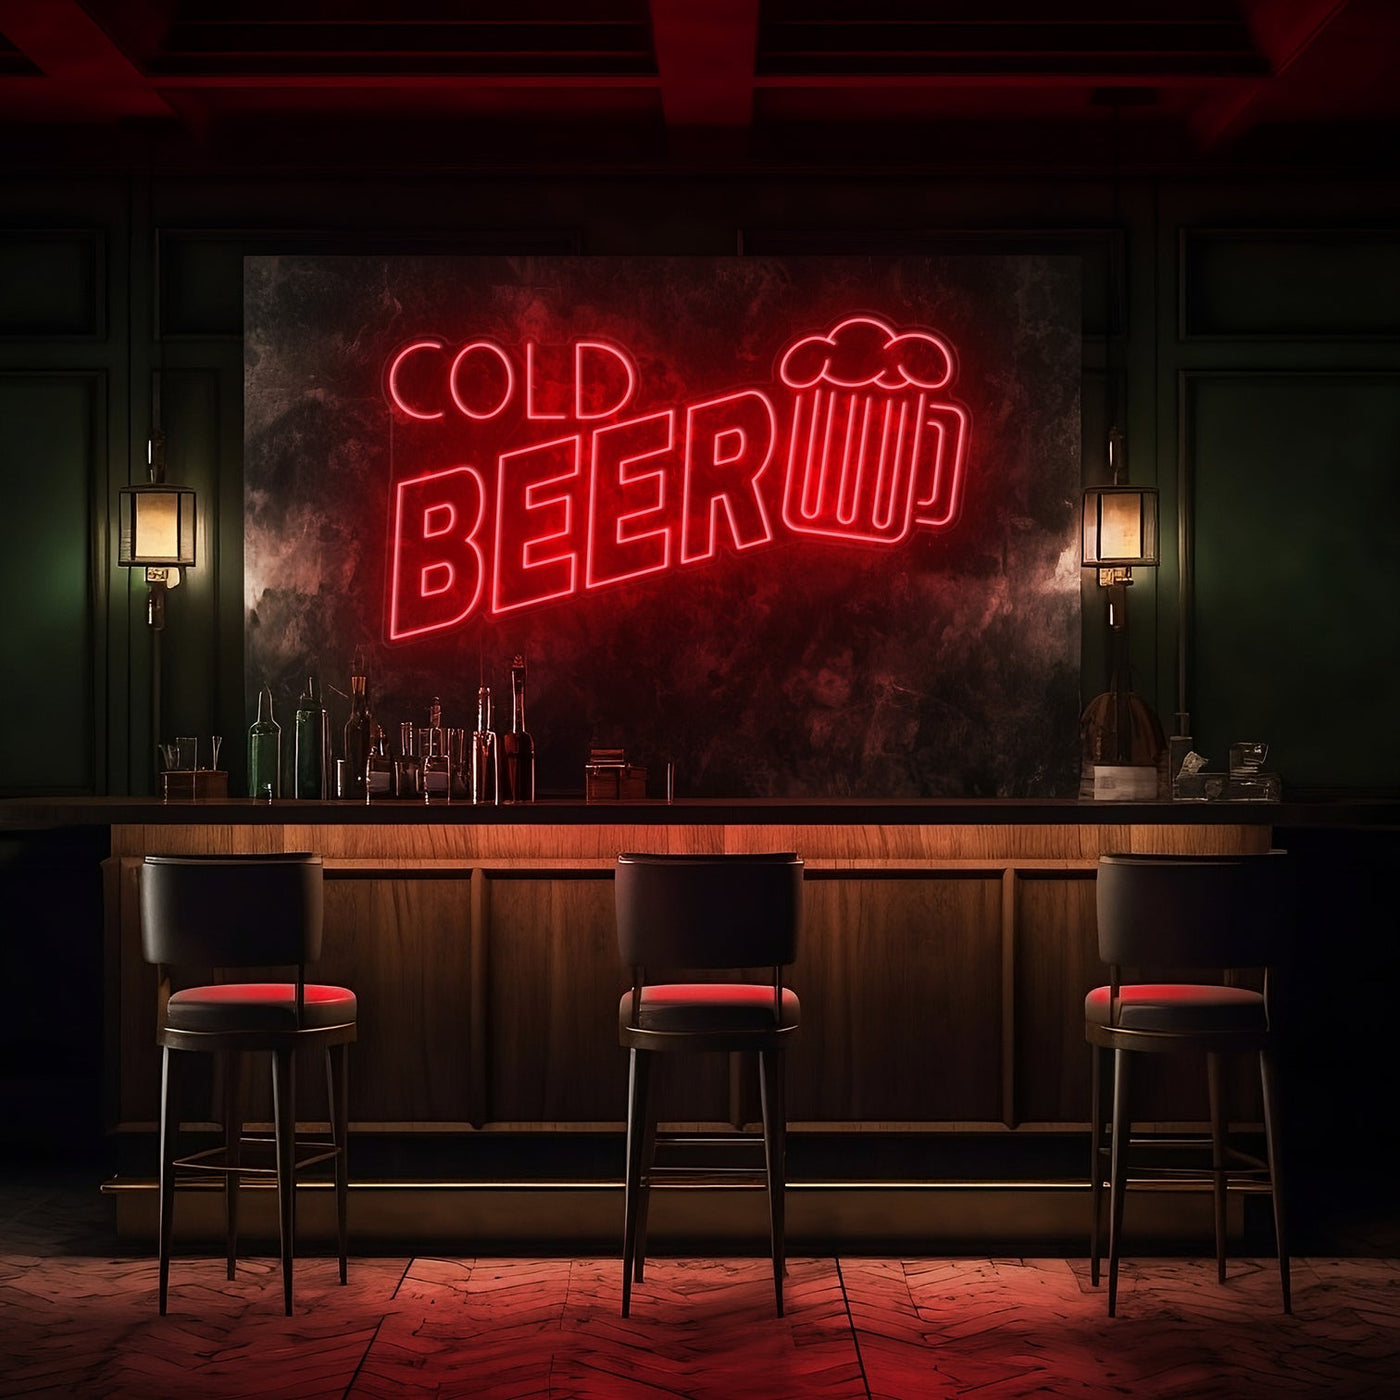 Cold Beer Bar LED Neon Sign - 30 InchRed